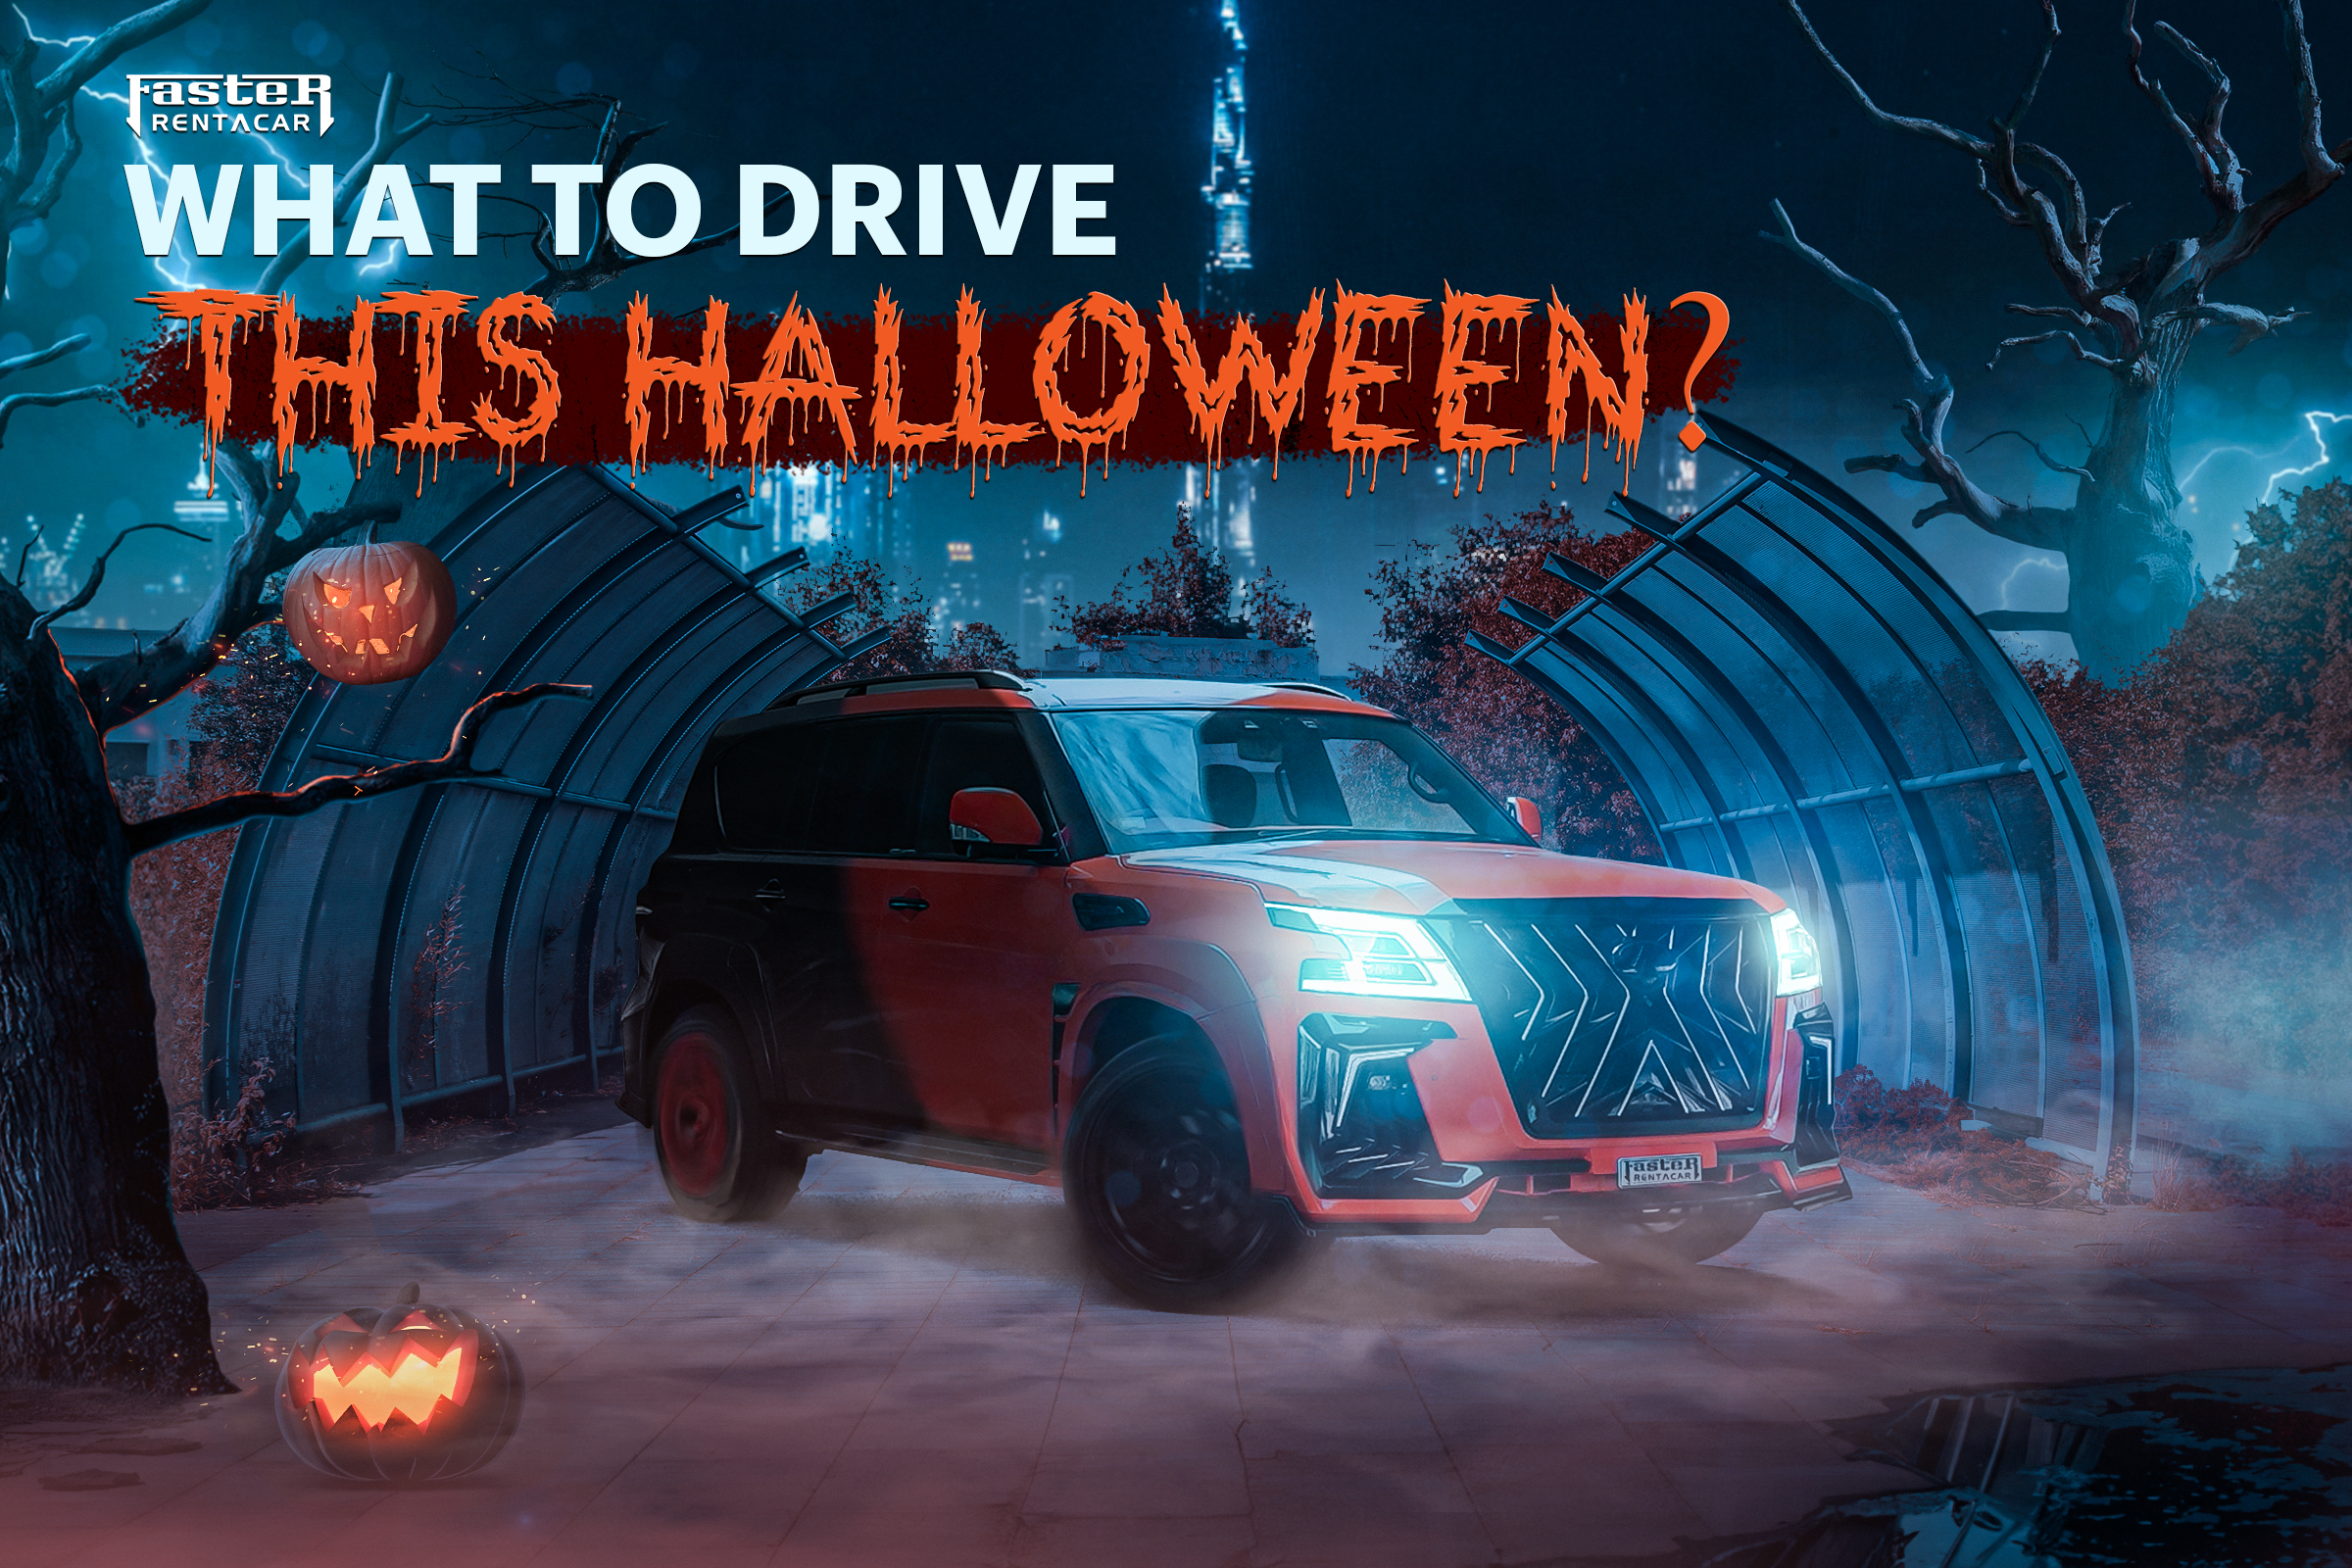 What to Drive this Halloween with Faster in Dubai?